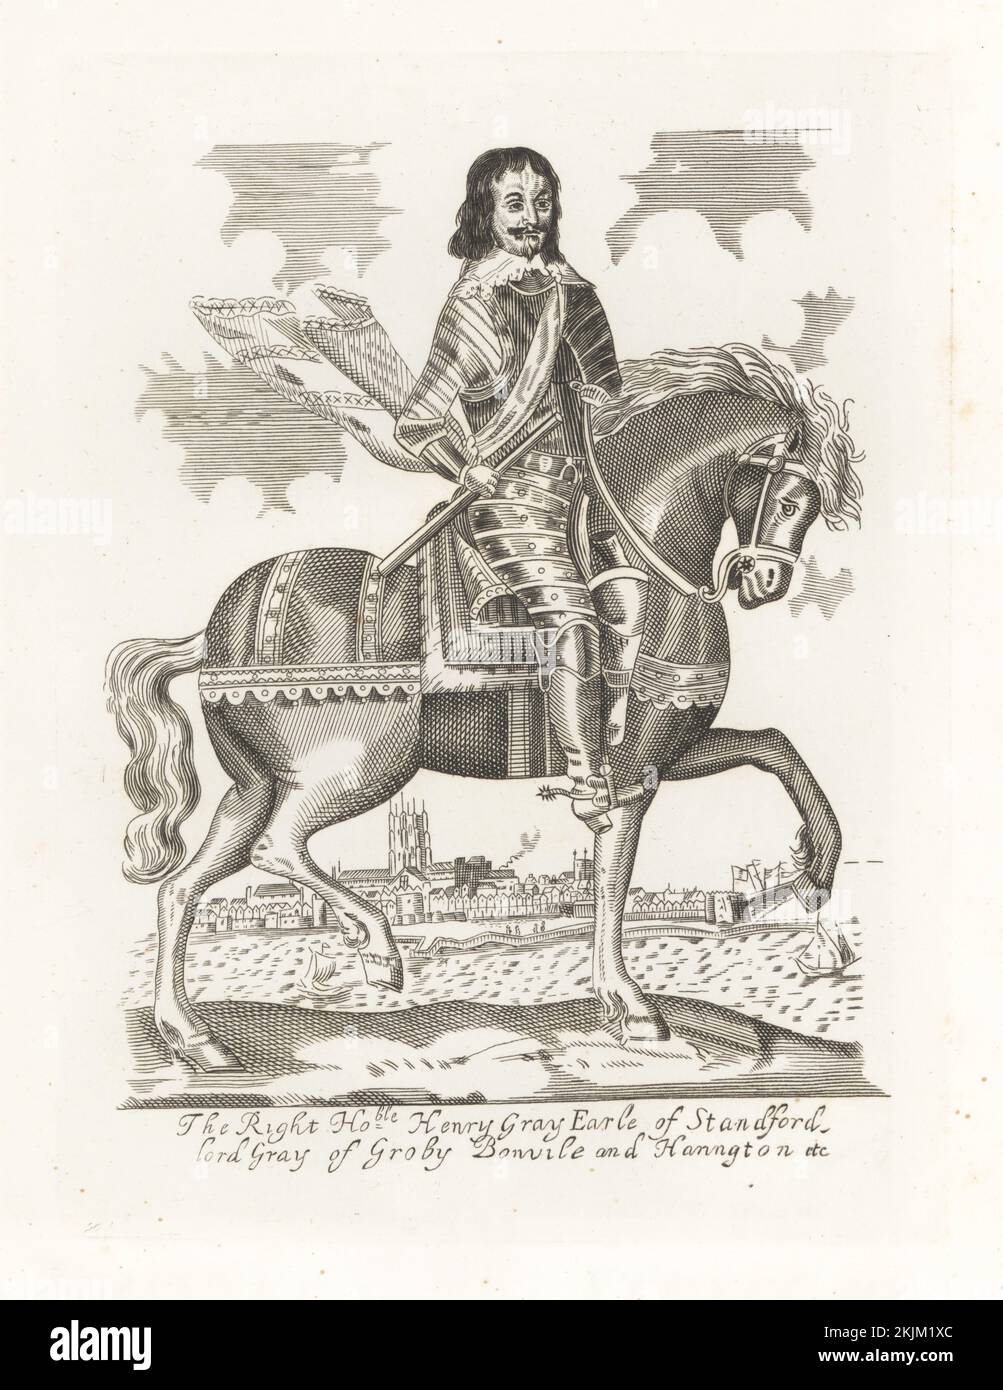 Henry Grey, 1st Earl of Stamford, c. 1599-1673. English nobleman and military leader. Roundhead general defeated at the siege of Exeter. Vignette of Exeter Cathedral and the River Exe. On horseback, in lace collar, suit of plate armour, boots and spurs. Henry Gray, Earl of Standford, Lord of Groby, Bonvile and Harrington. From the unique equestrian print in Earl Spenser's Clarendon. Copperplate engraving from Samuel Woodburn’s Gallery of Rare Portraits Consisting of Original Plates, George Jones, 102 St Martin’s Lane, London, 1816. Stock Photo